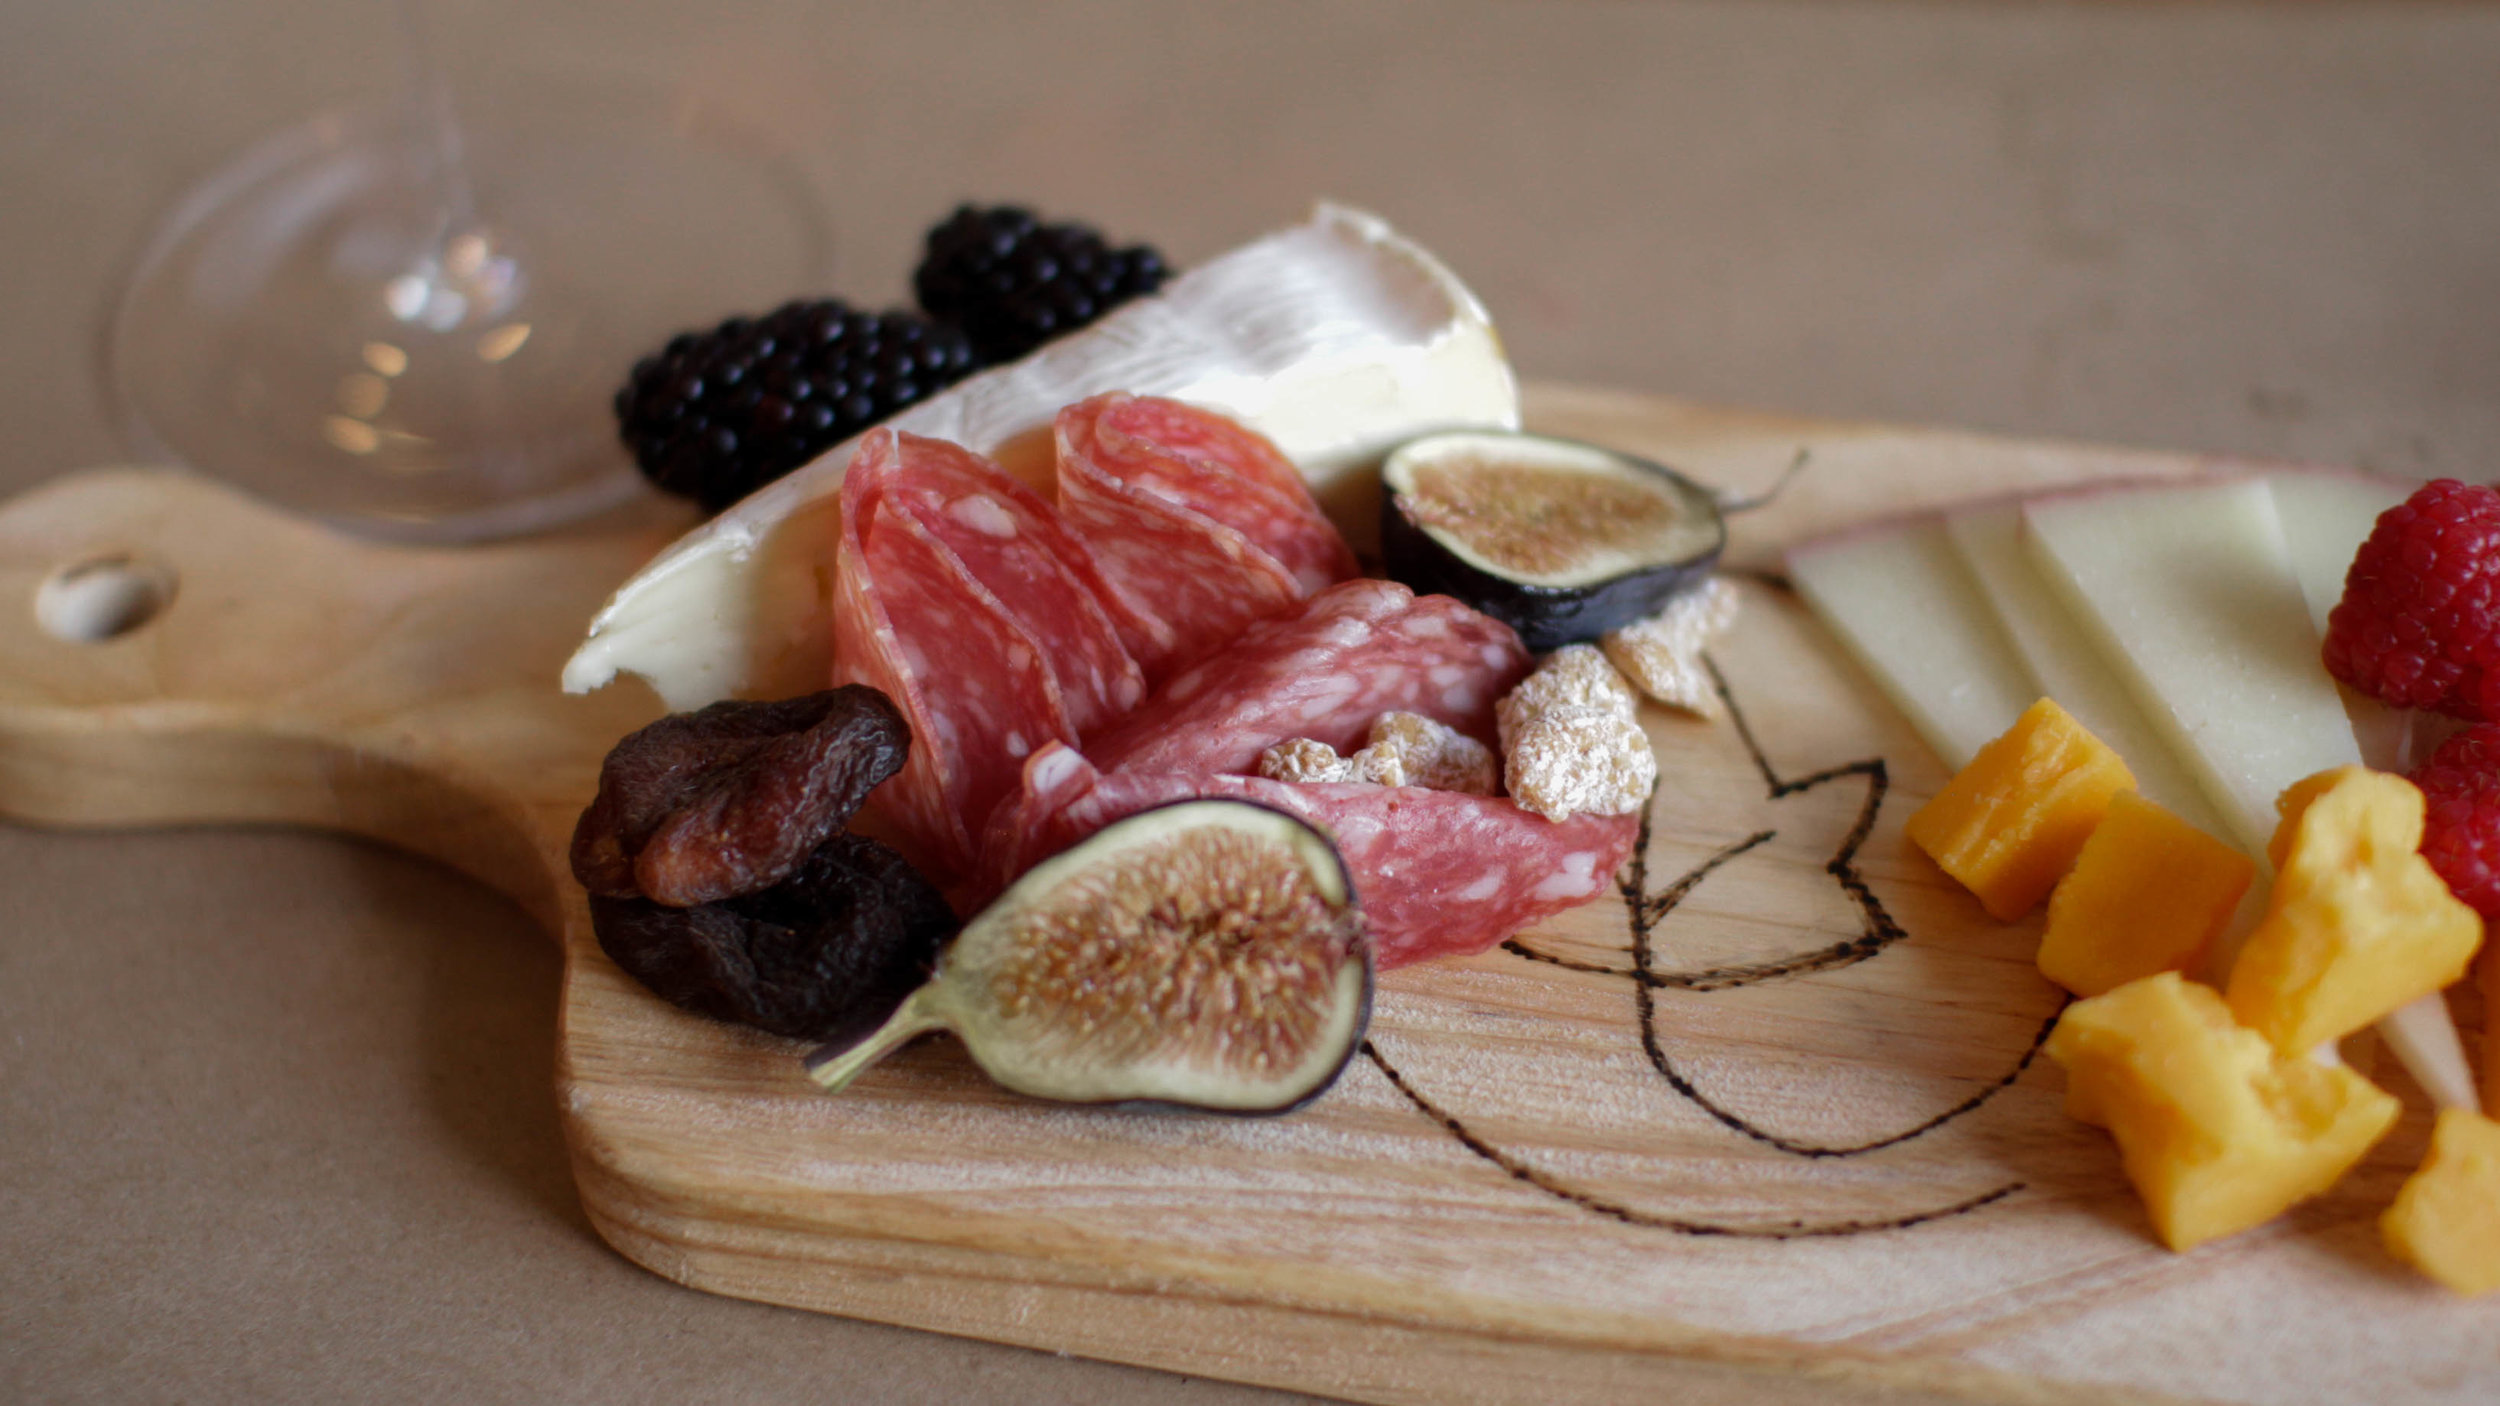 How to arrange a charcuterie board for serving